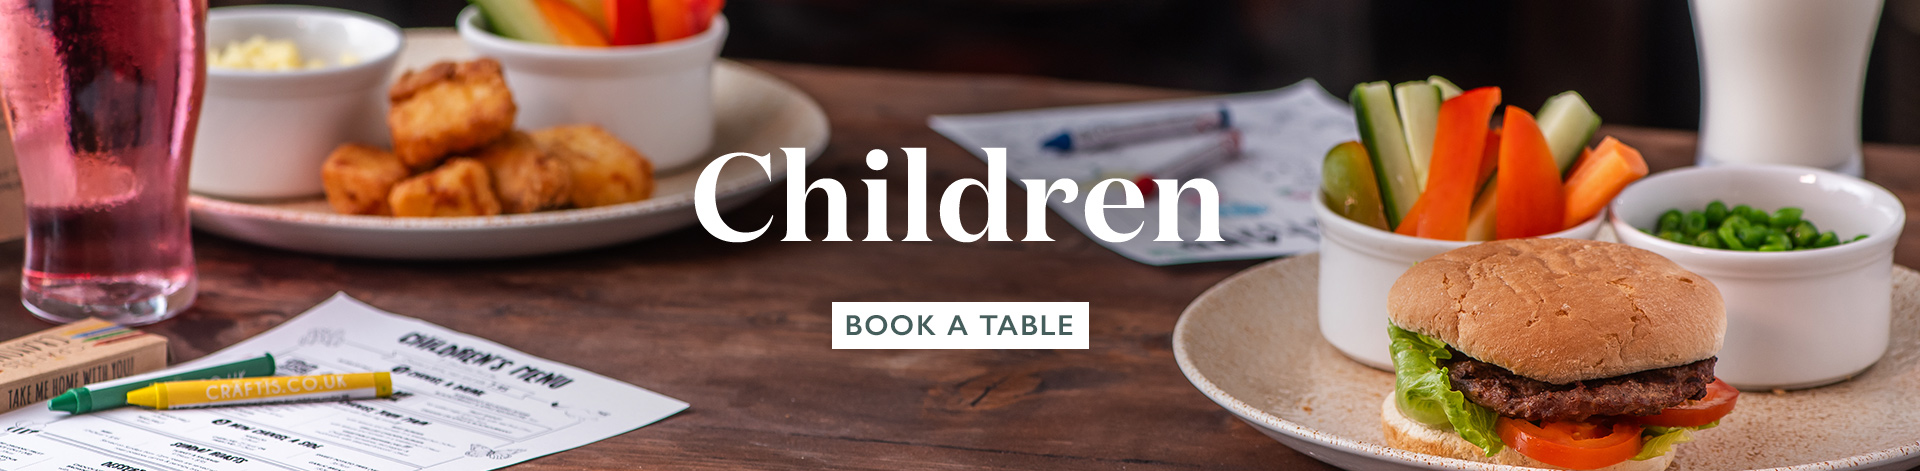 Children's Menu at The Old Stables